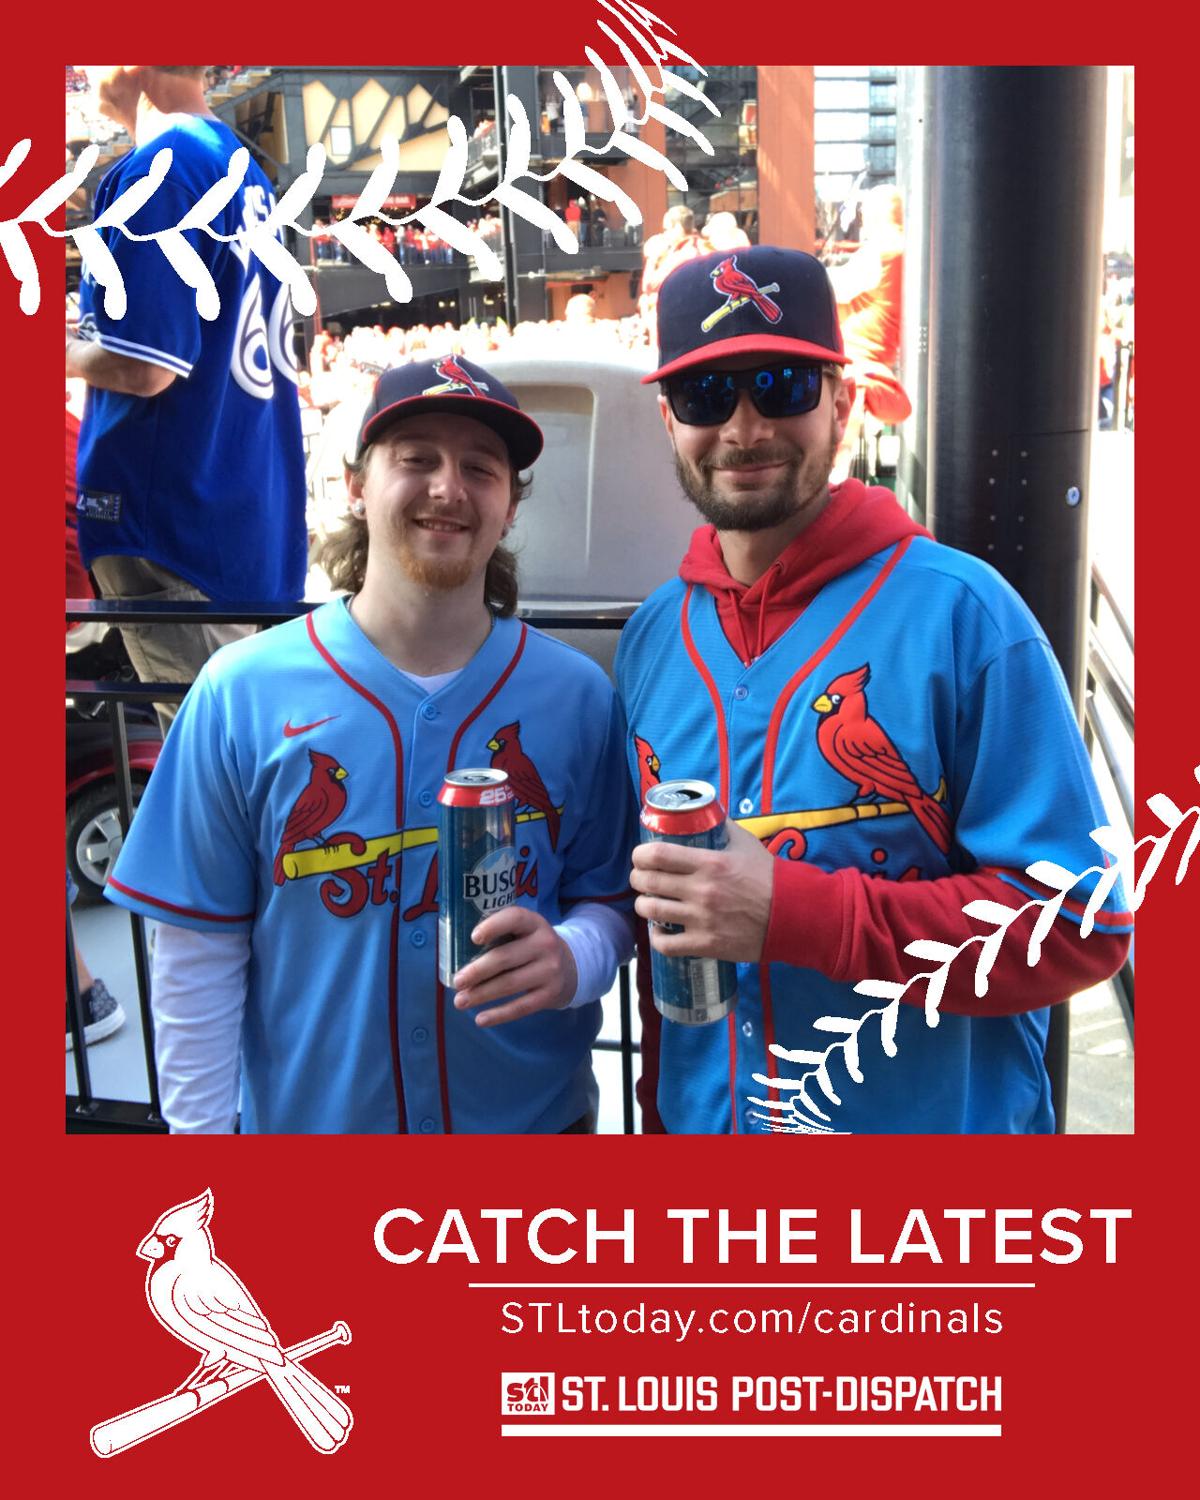 See who celebrated Cardinals Opening Day!